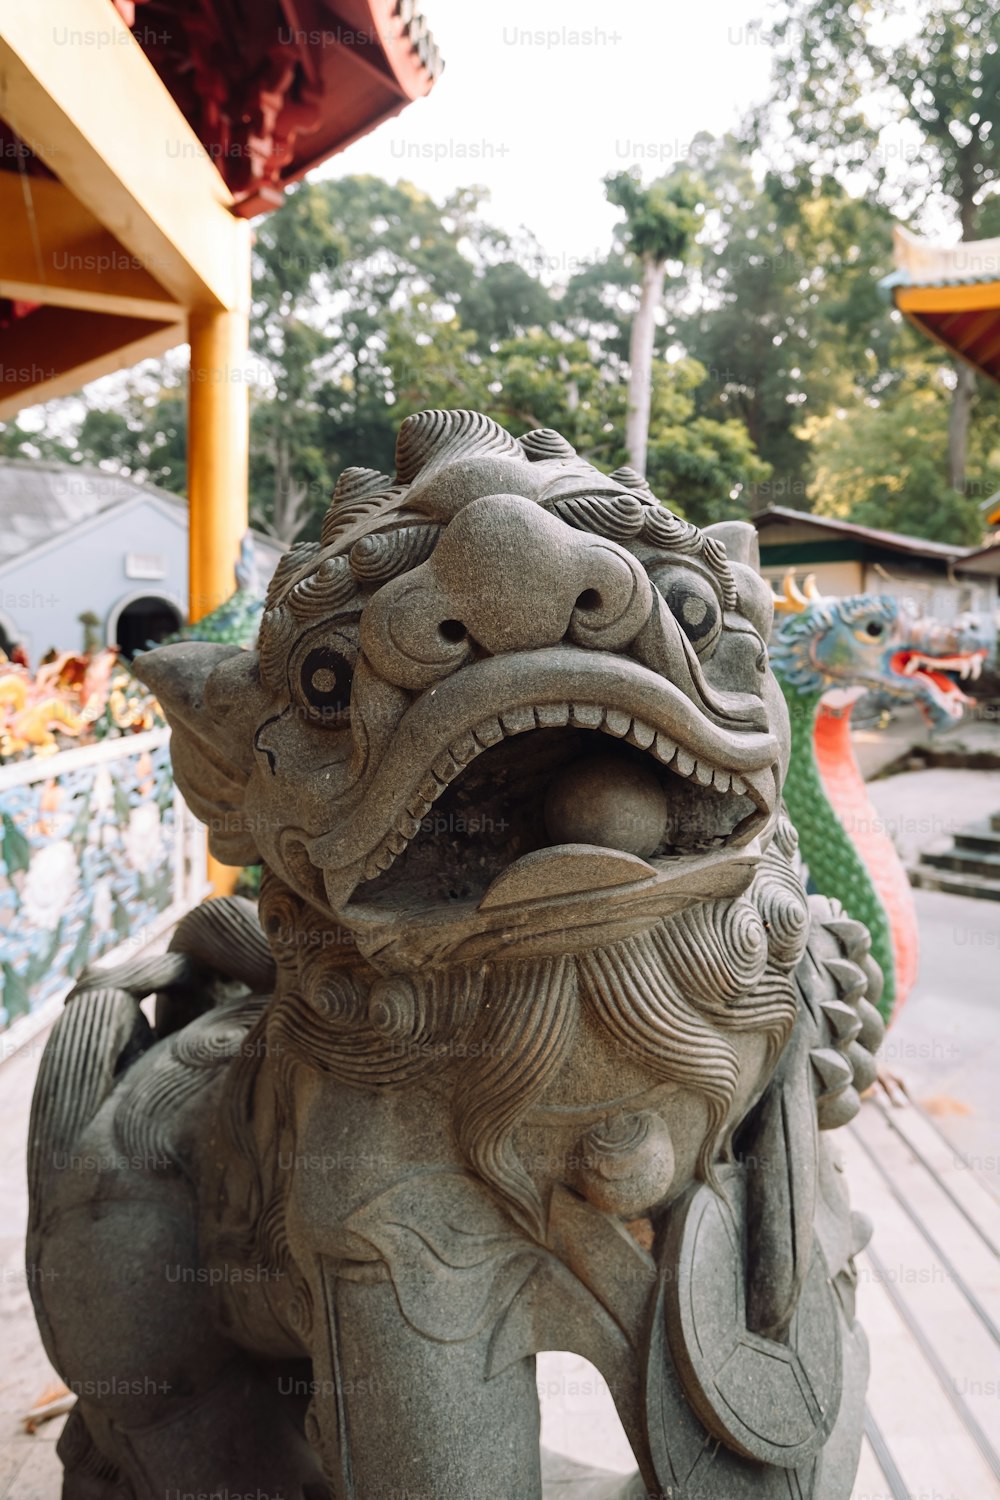 a statue of a dragon on a wooden bench